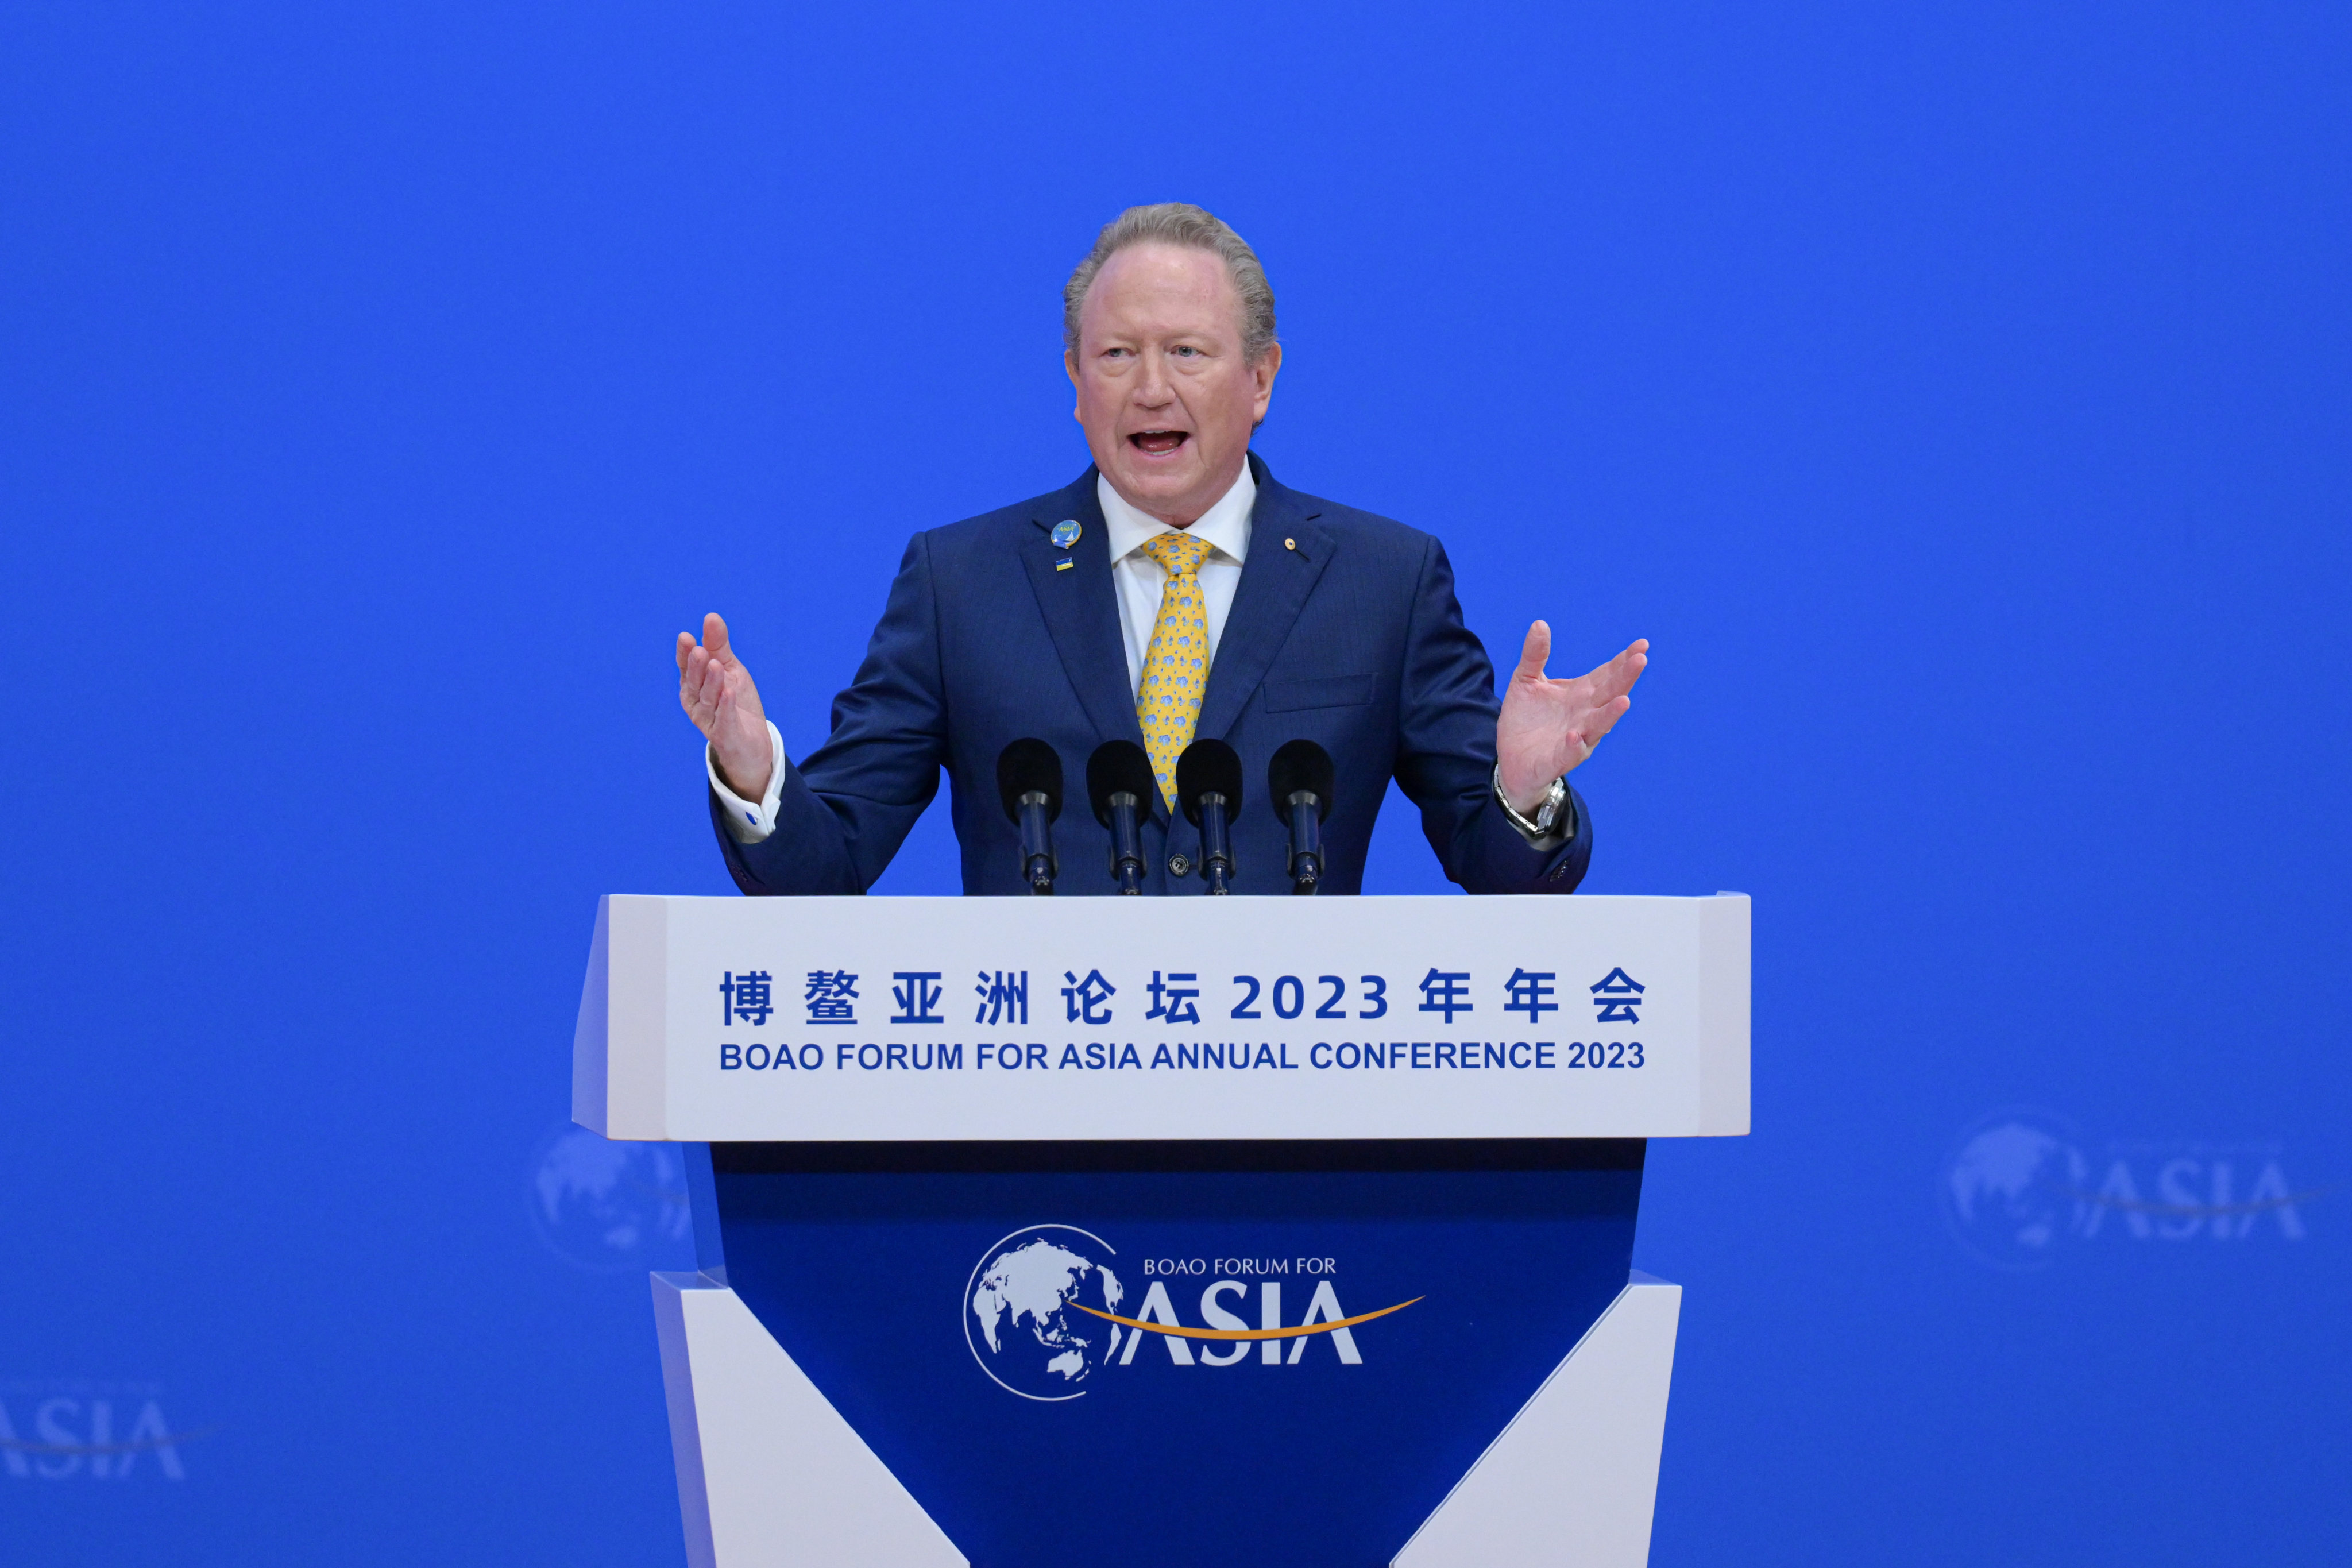 Australian billionaire Andrew Forrest during a speech at the Boao Forum for Asia Annual Conference 2023 in Boao, south China’s Hainan Province, on Thursday. Photo: Xinhua